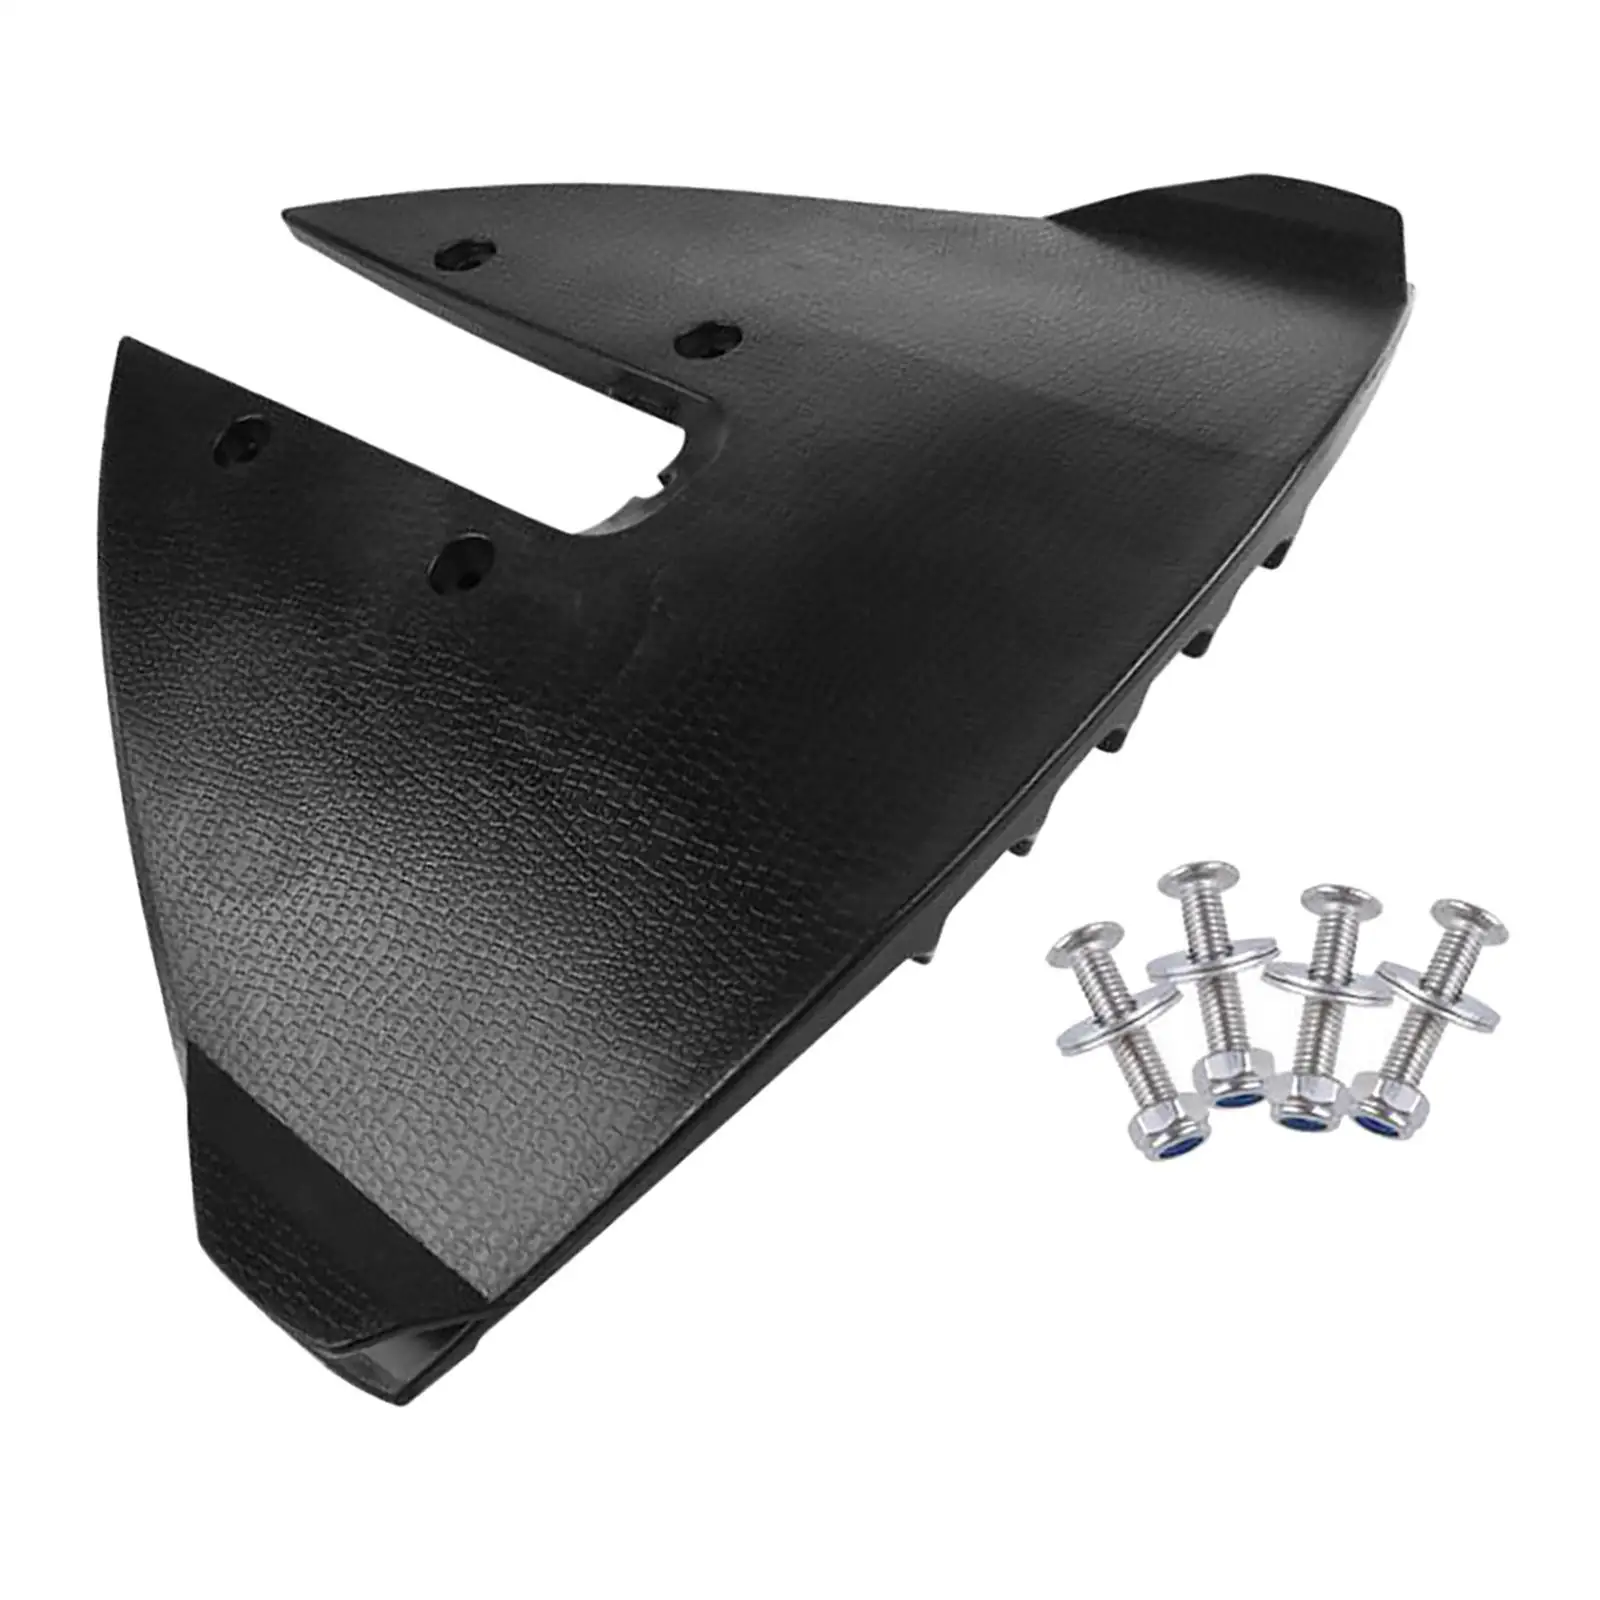 Hydrofoil Stabilizer Outboard 20 HP - 300 HP Engines W/ 4 Screws Hydrofoil for Outboard Motor Outboard for Outboards Motors